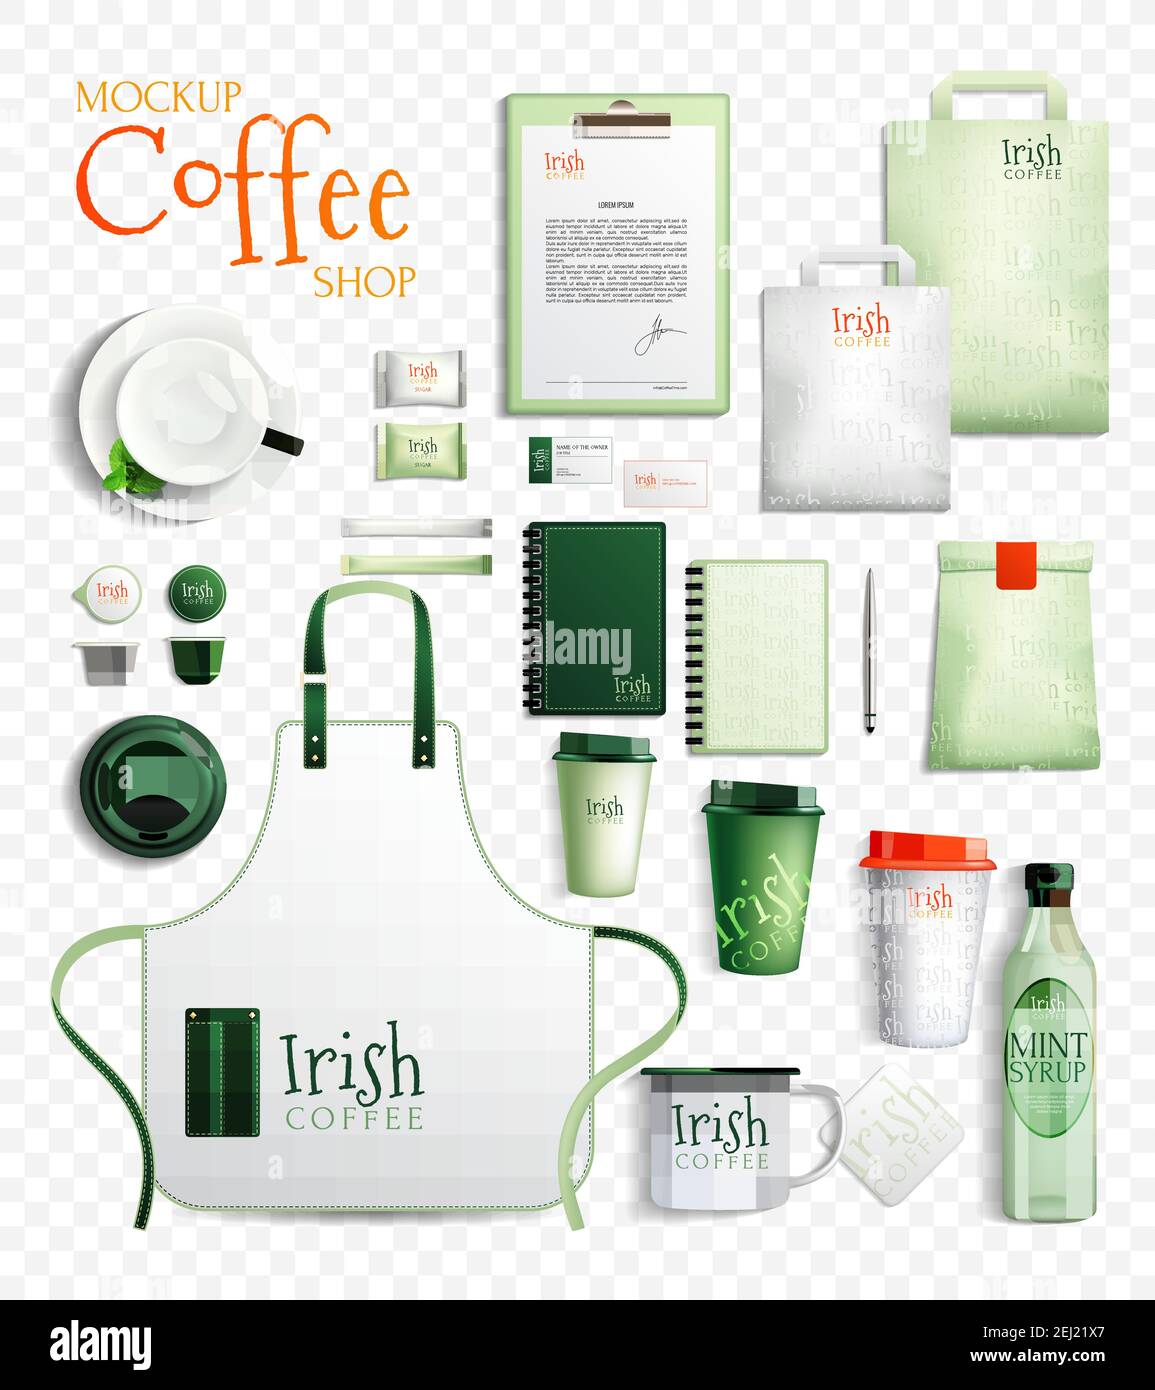 https://c8.alamy.com/comp/2EJ21X7/mockup-coffee-shop-design-essentials-set-with-isolated-images-of-organic-irish-coffeeshop-branded-products-vector-illustration-2EJ21X7.jpg